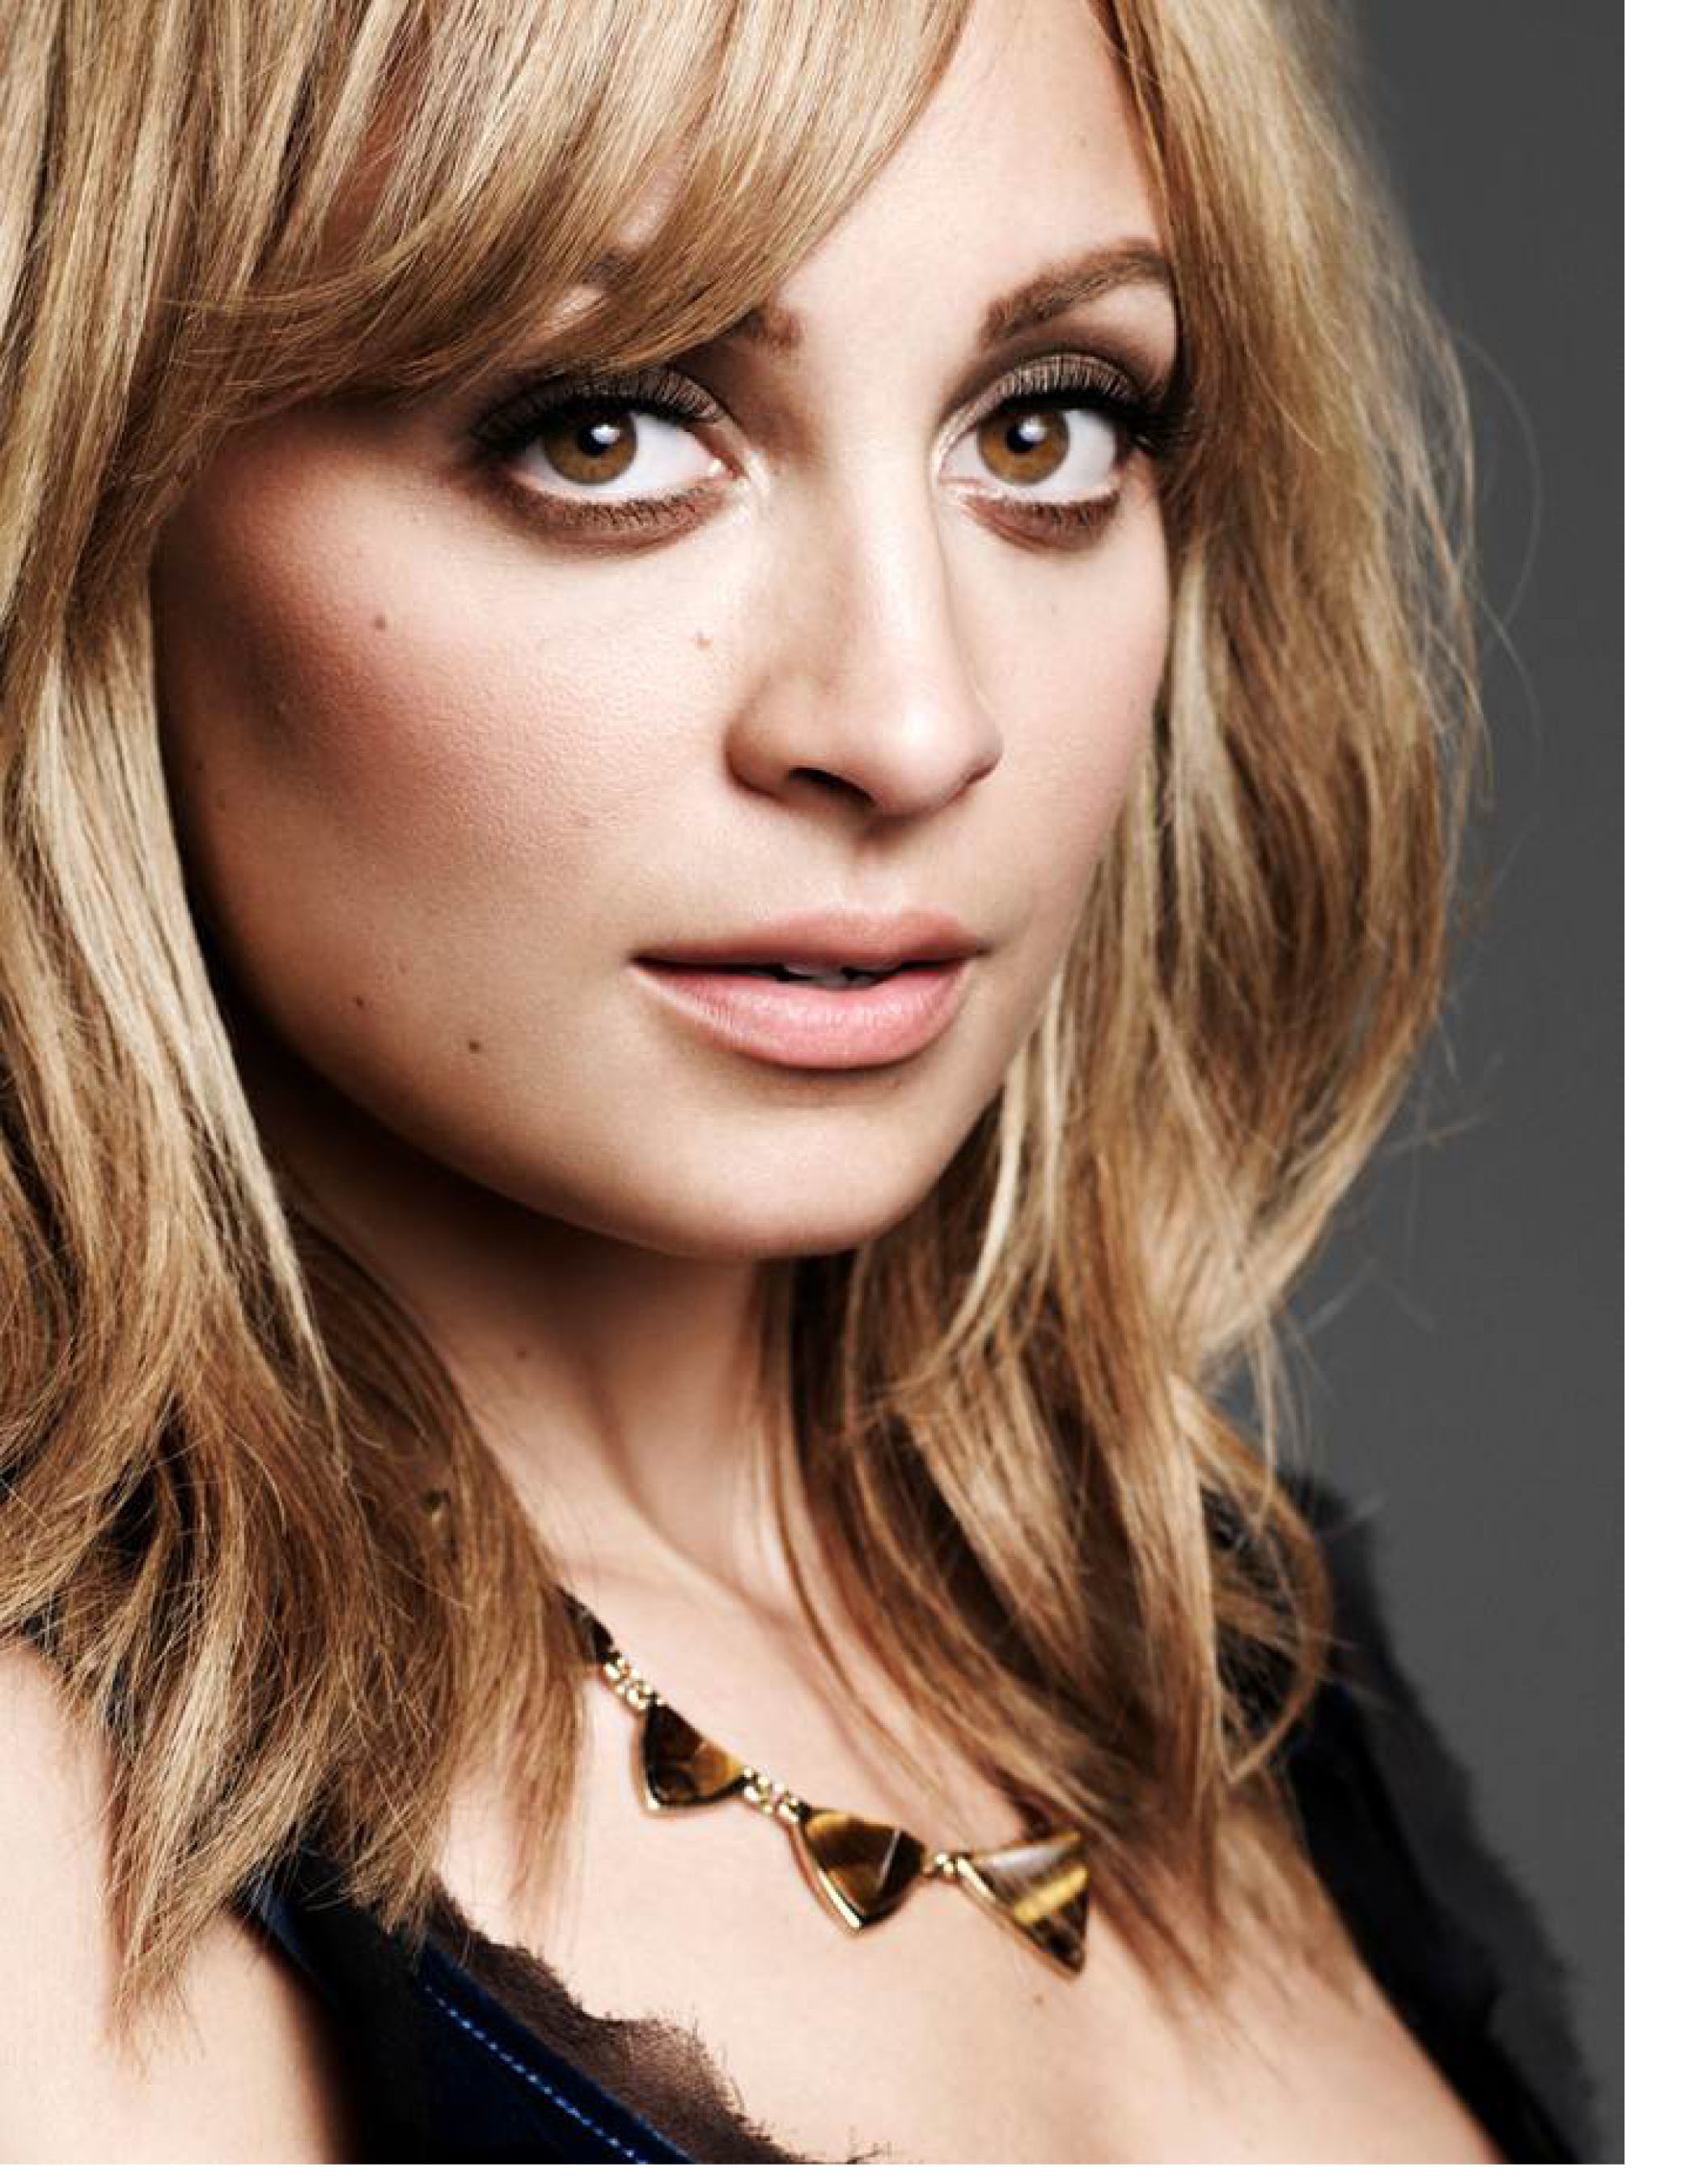 Fashion Icon Nicole Richie to Give The Big Interview Keynote at Licensing Expo 2014. (PRNewsFoto/Advanstar Communications Inc.)